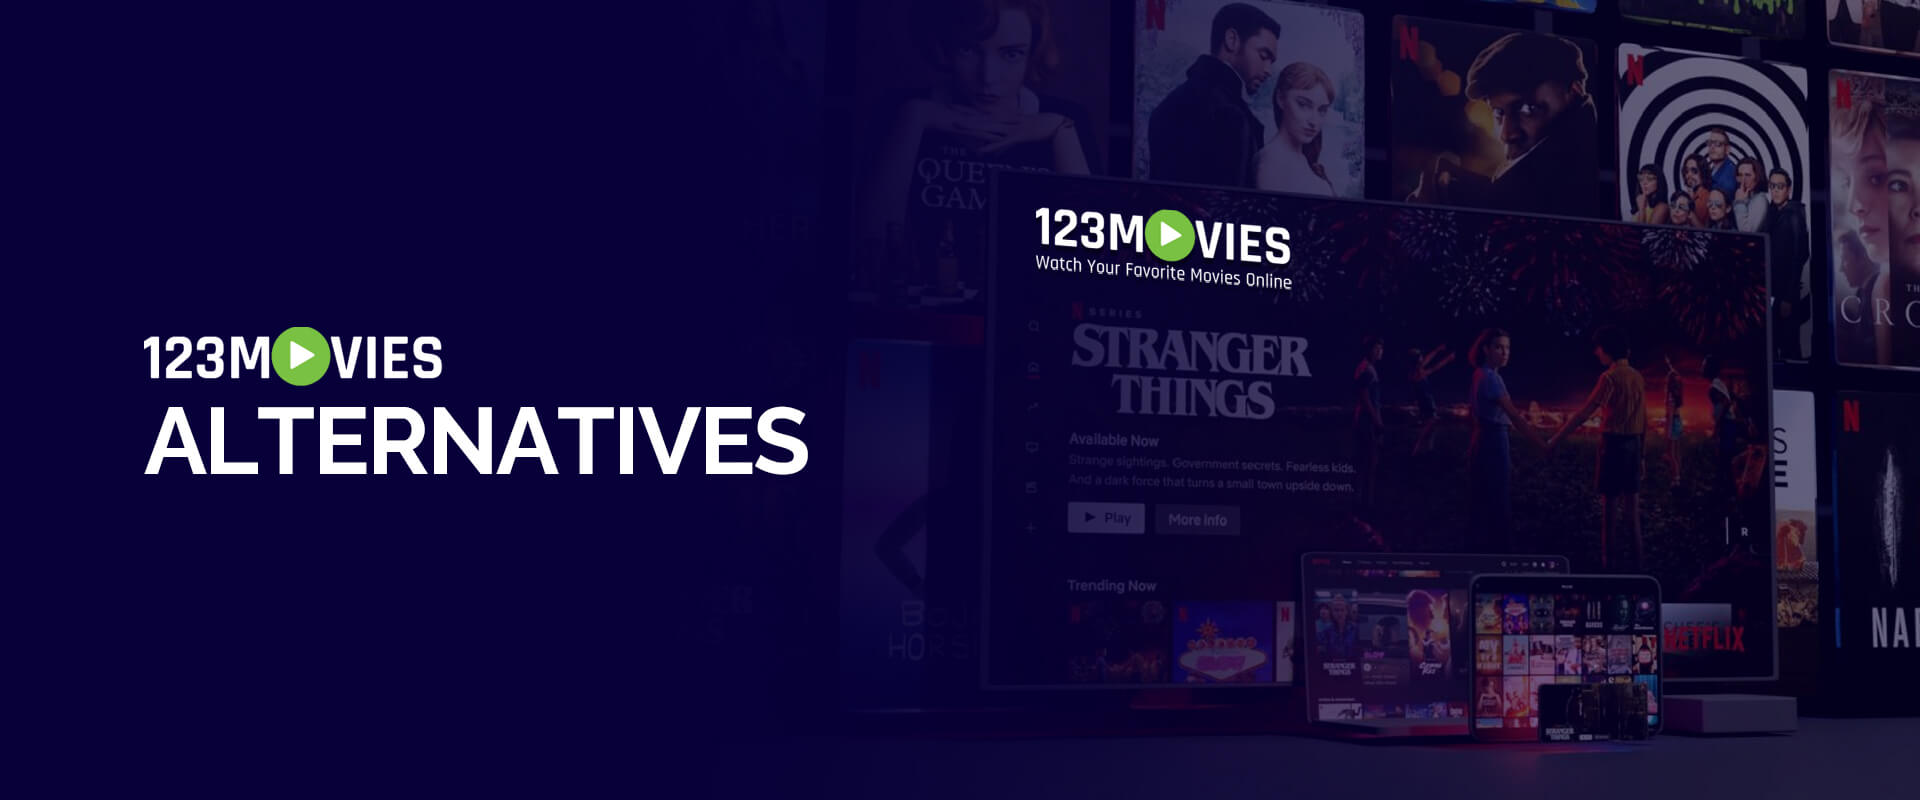 How to Watch Movies with the Best 123Movies Alternatives